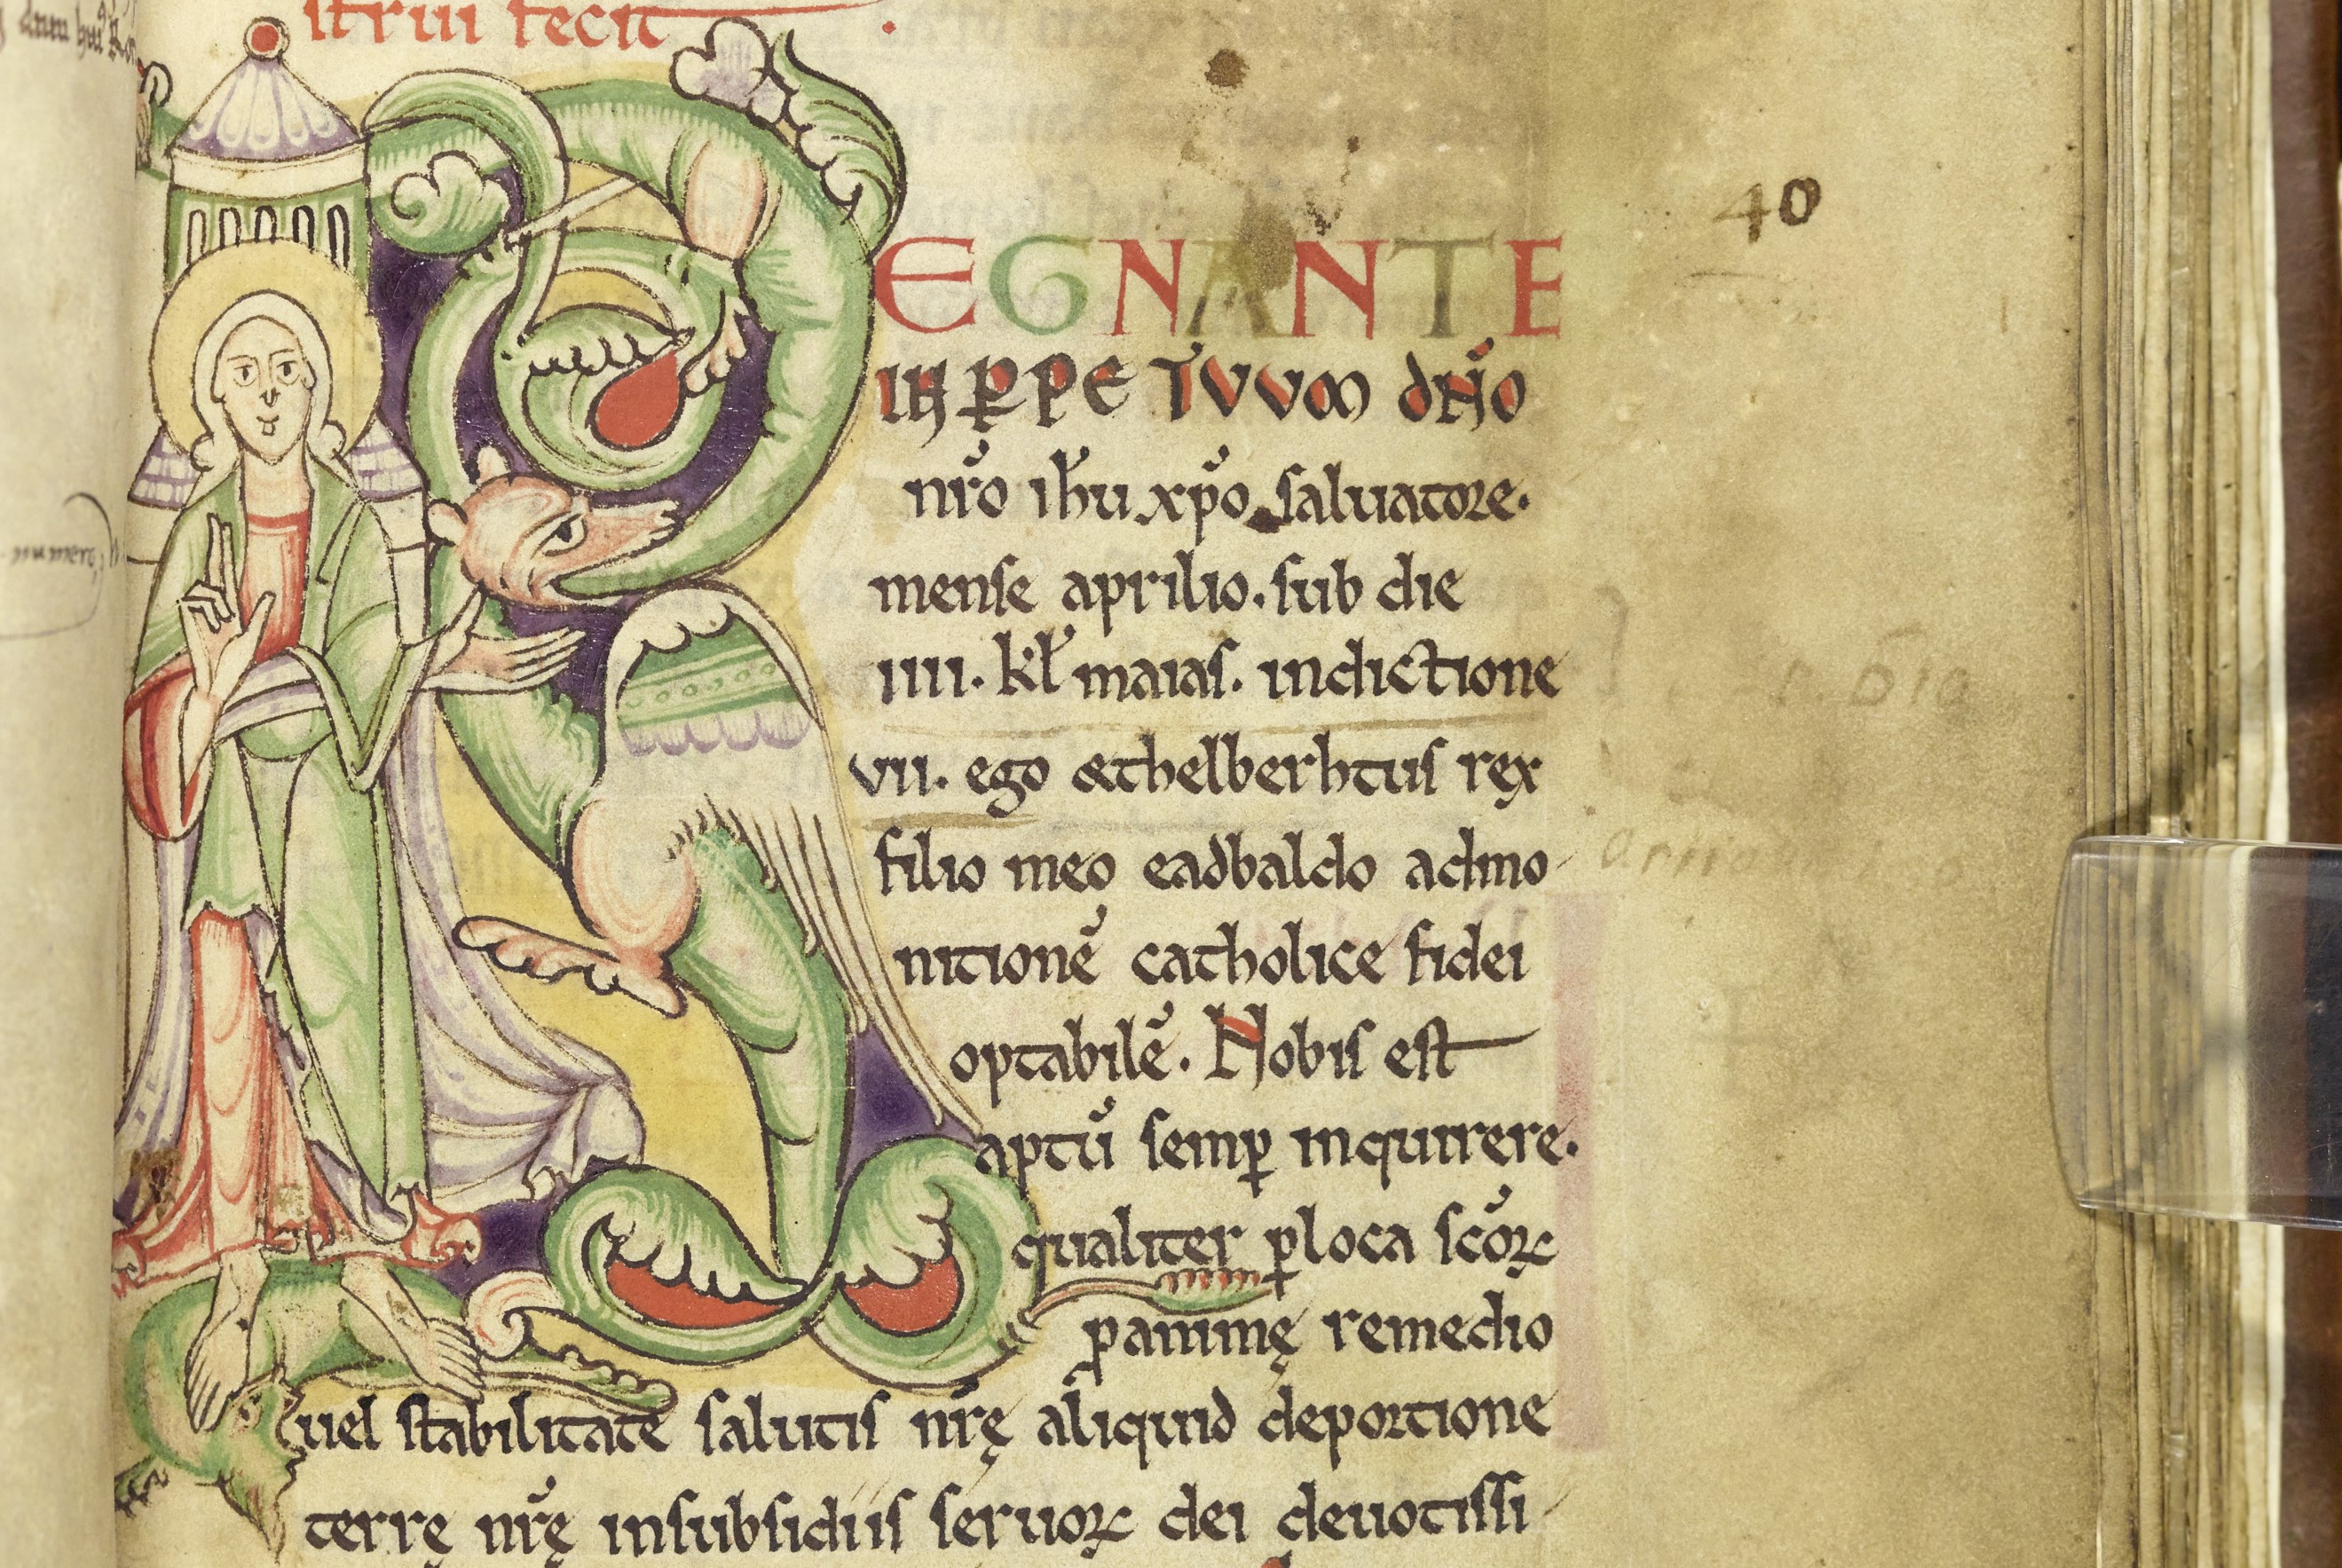 A richly illuminated 'B' opens the Rochester Bestiary.